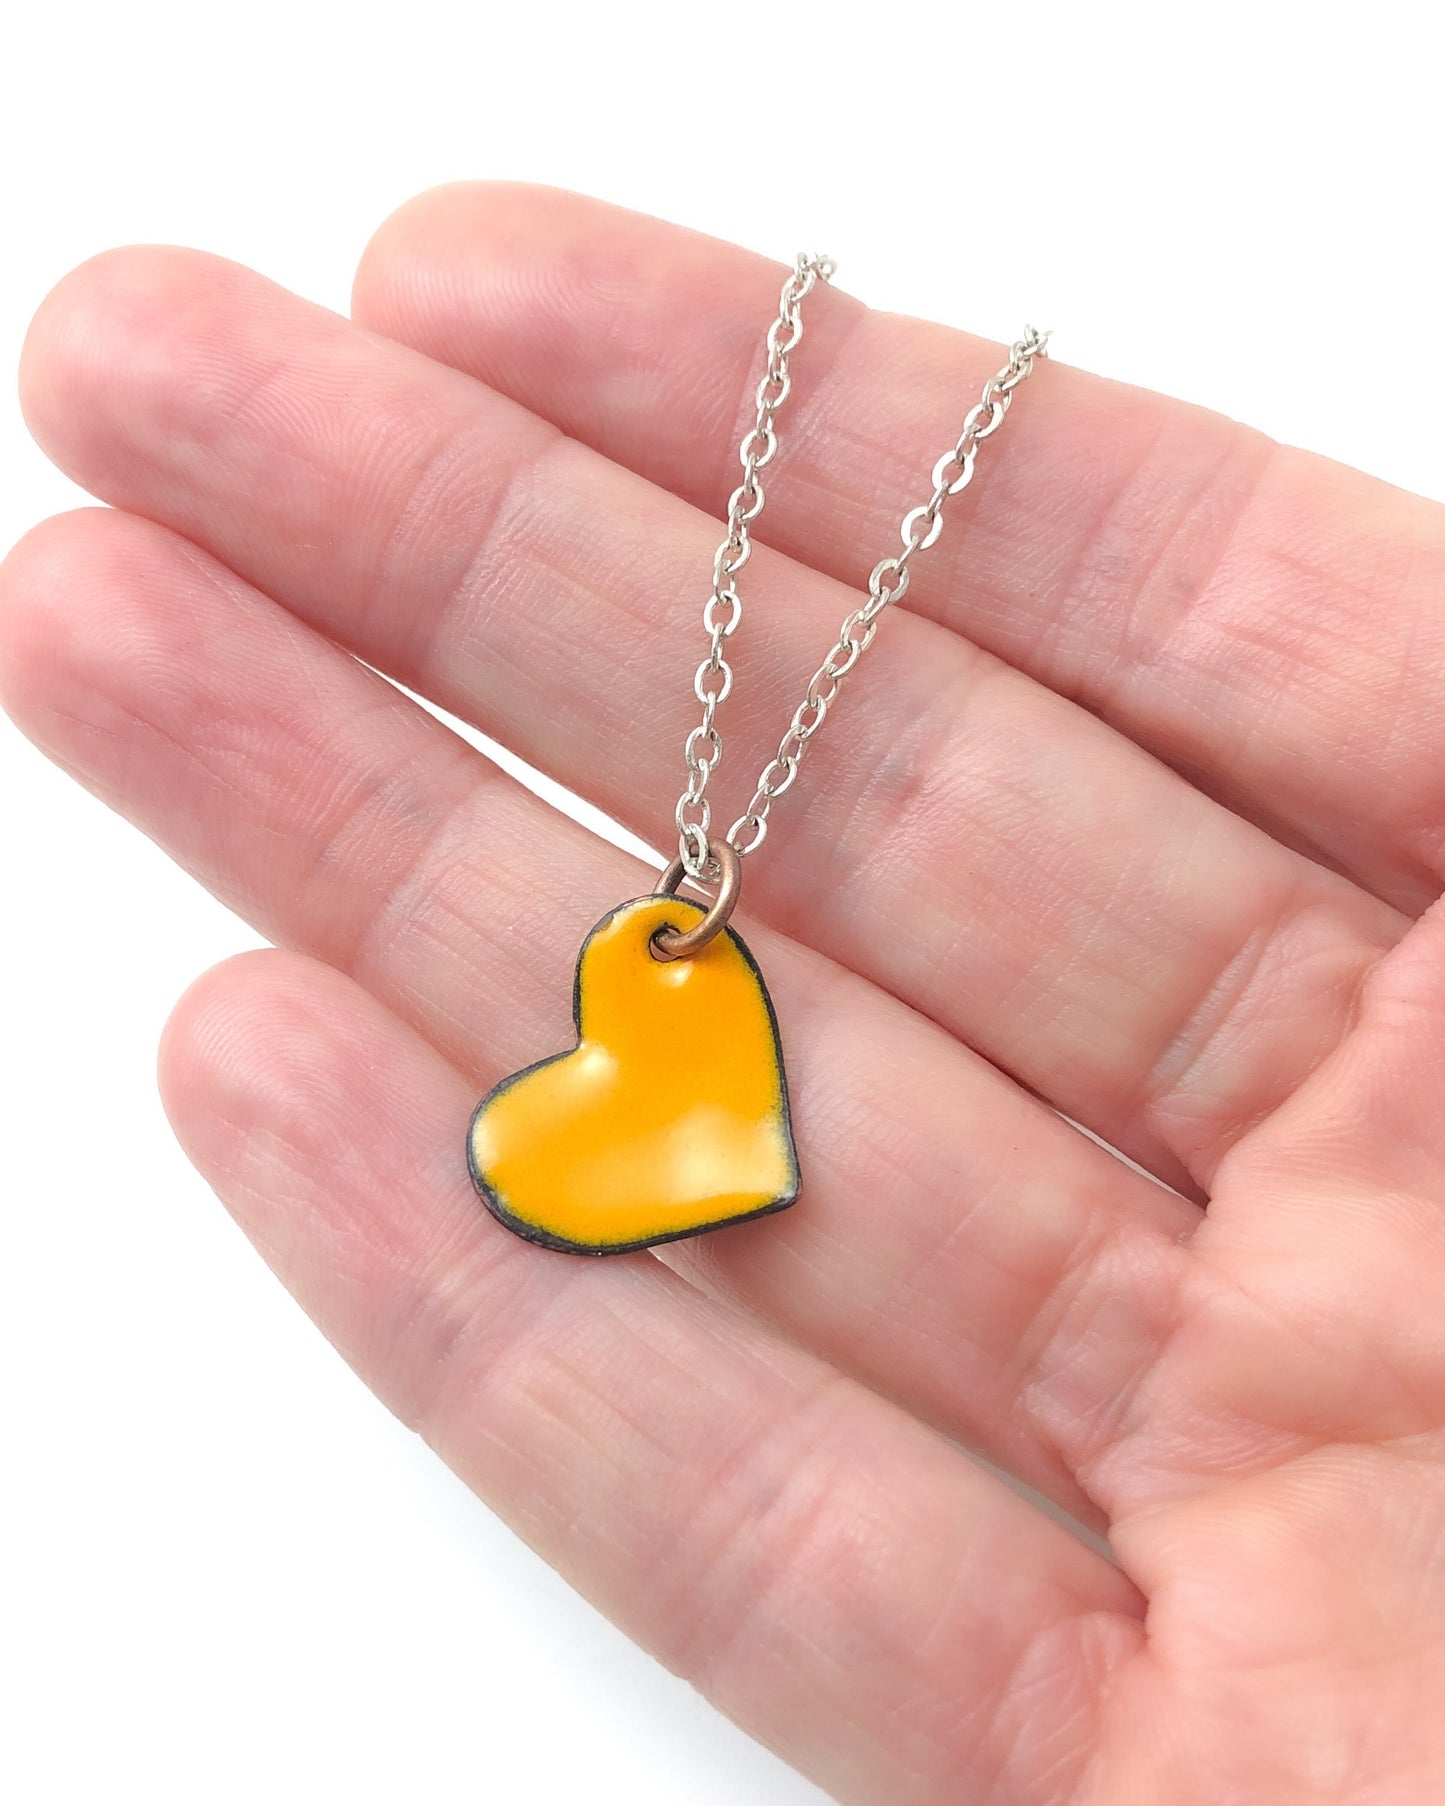 Gold arch & scarlet enamel heart necklace [ready to ship]